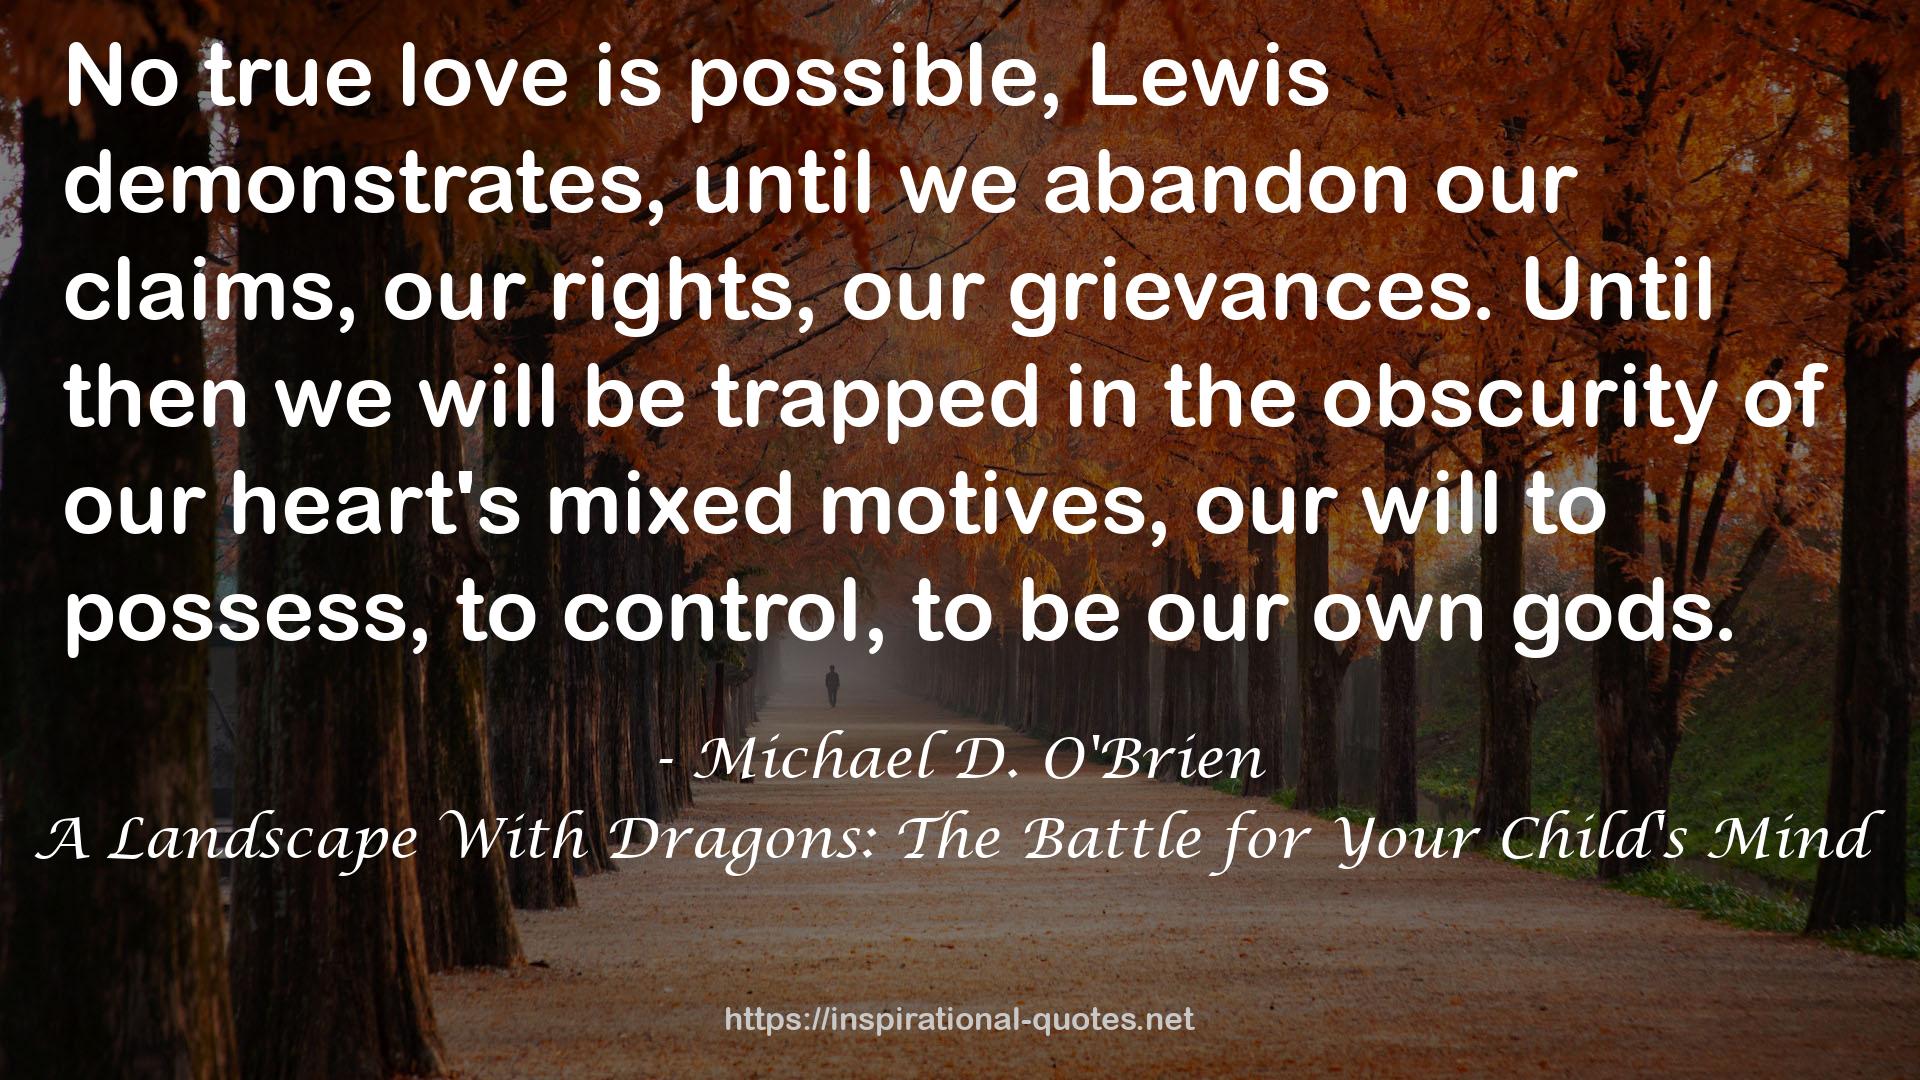 A Landscape With Dragons: The Battle for Your Child's Mind QUOTES